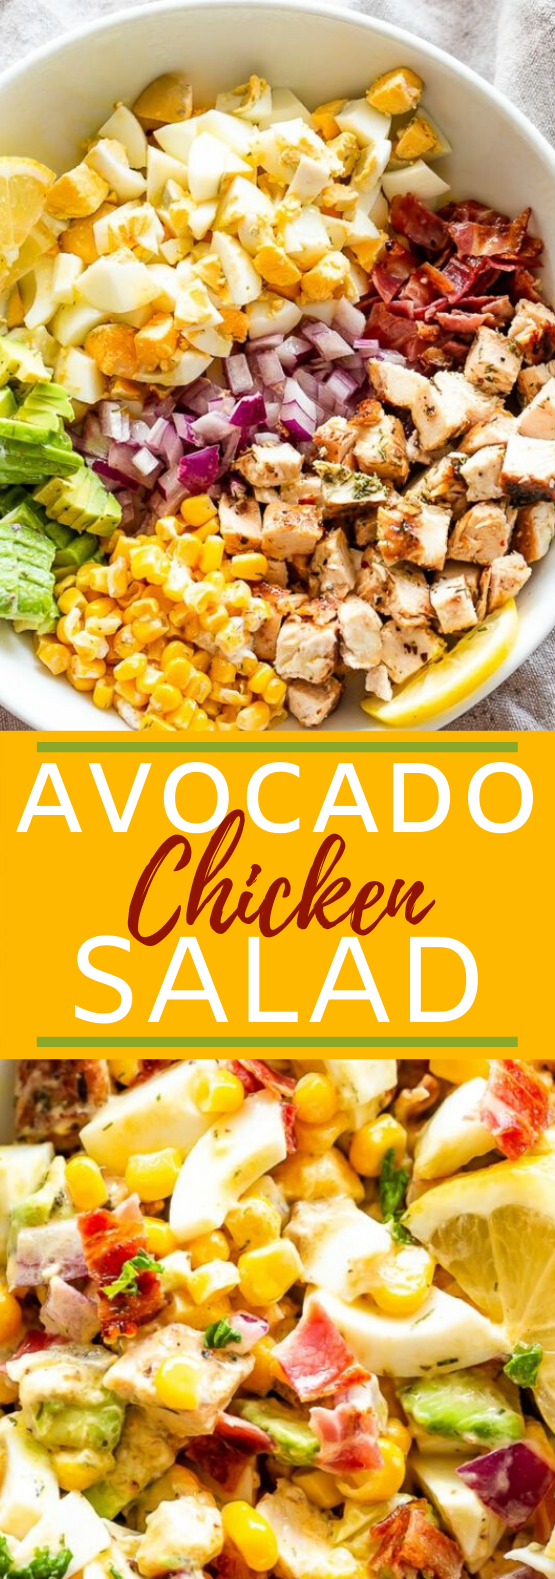 Avocado Chicken Egg Salad with Creamy Lemon Dill Dressing #healthy #salad #lowcarb #diet #lunch